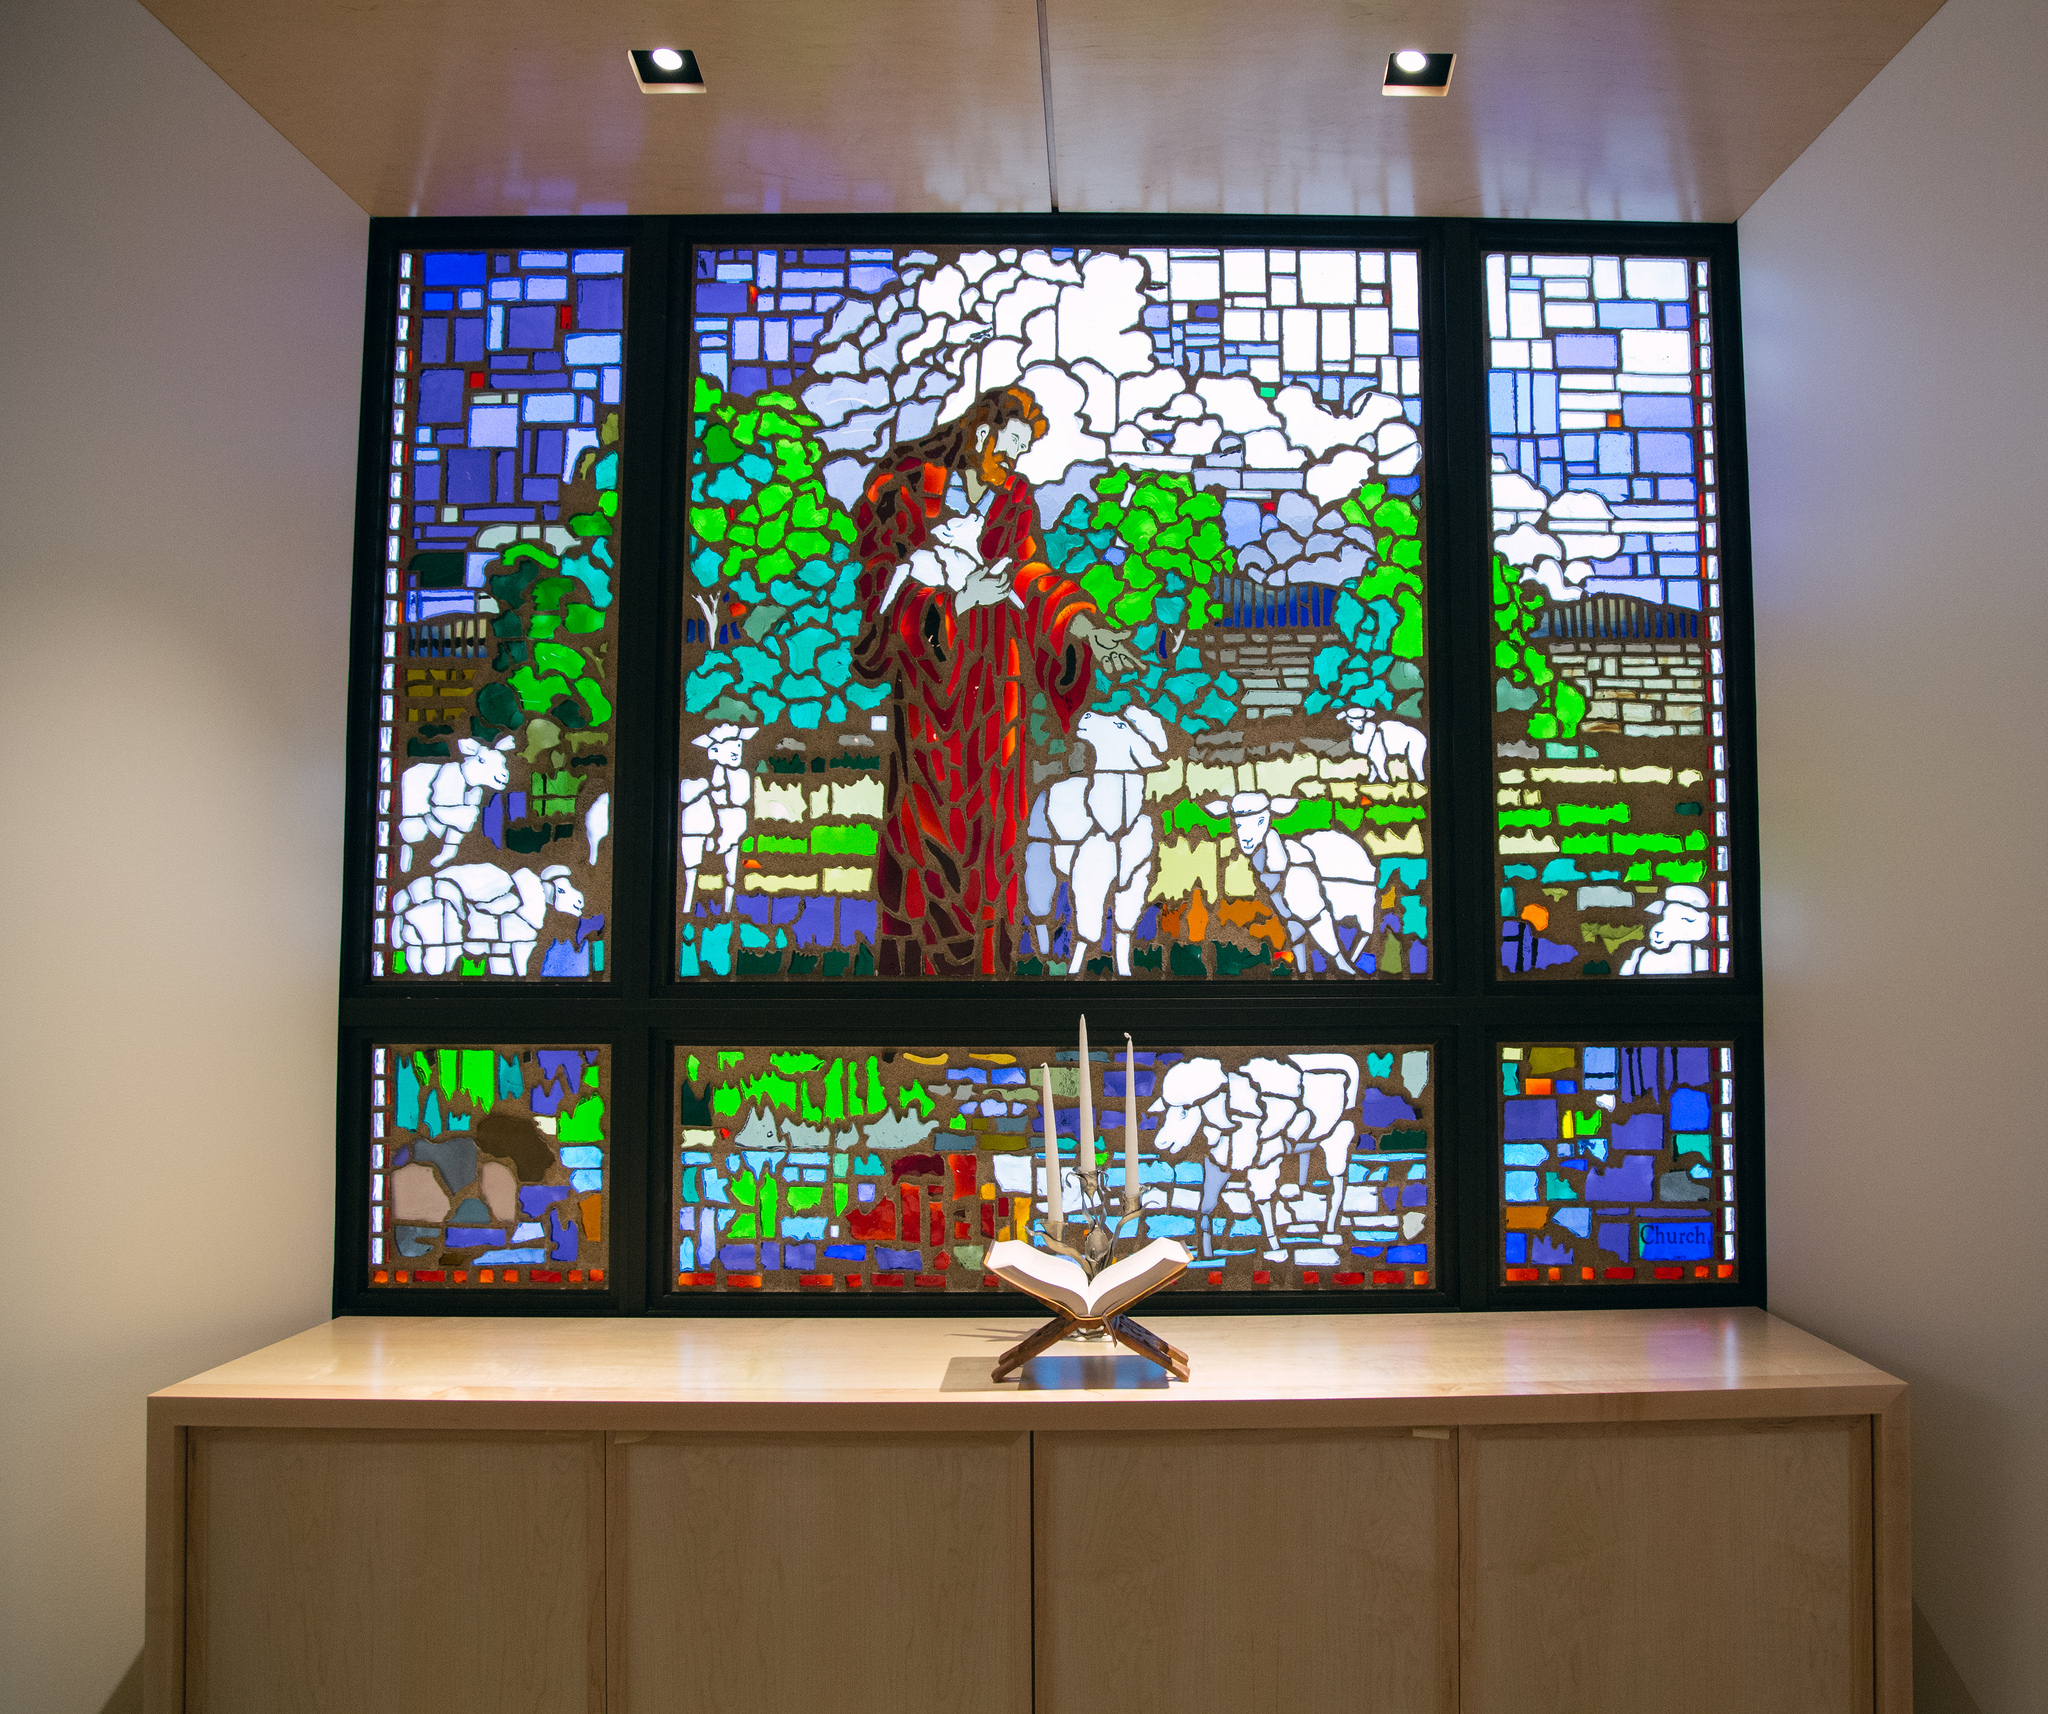 The stained-glassed was created by Clayton Connolly. The glass portrays Jesus as the good shepherd. Jesus is surrounded by nine sheep, representing the division’s nine union.